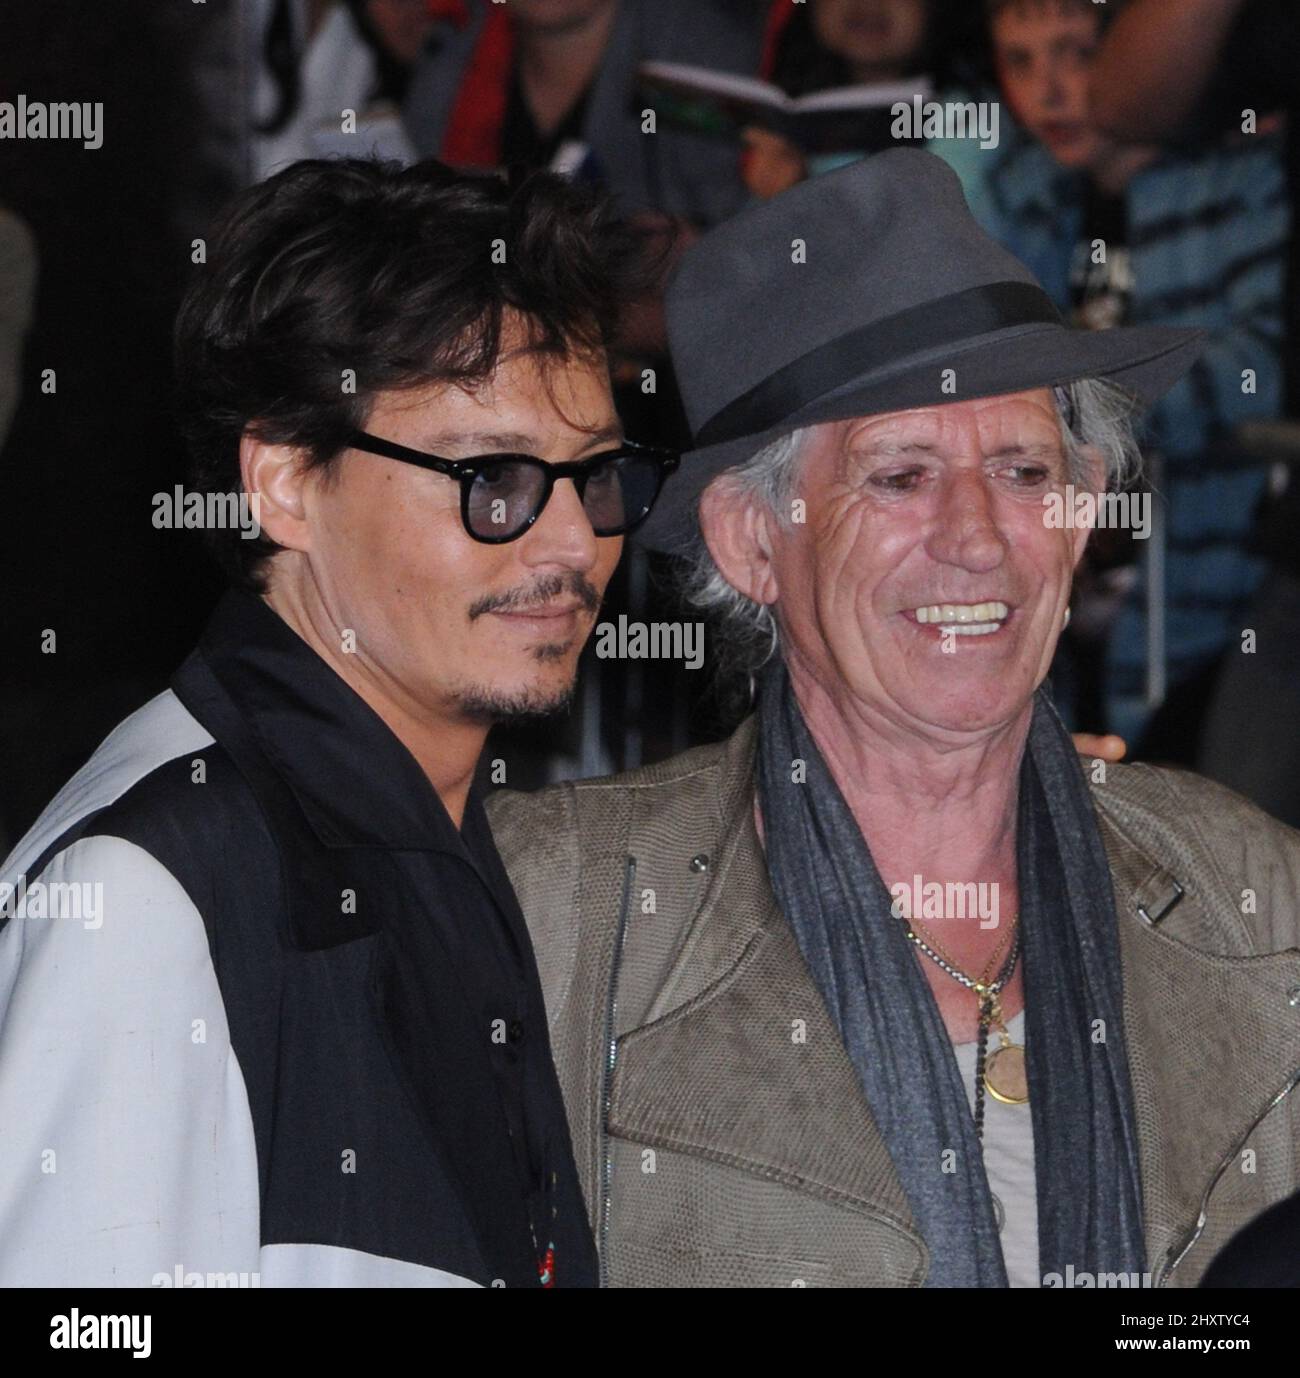 Johnny Depp And Keith Richards At The Pirates Of The Caribbean On Stranger Tides World 6684